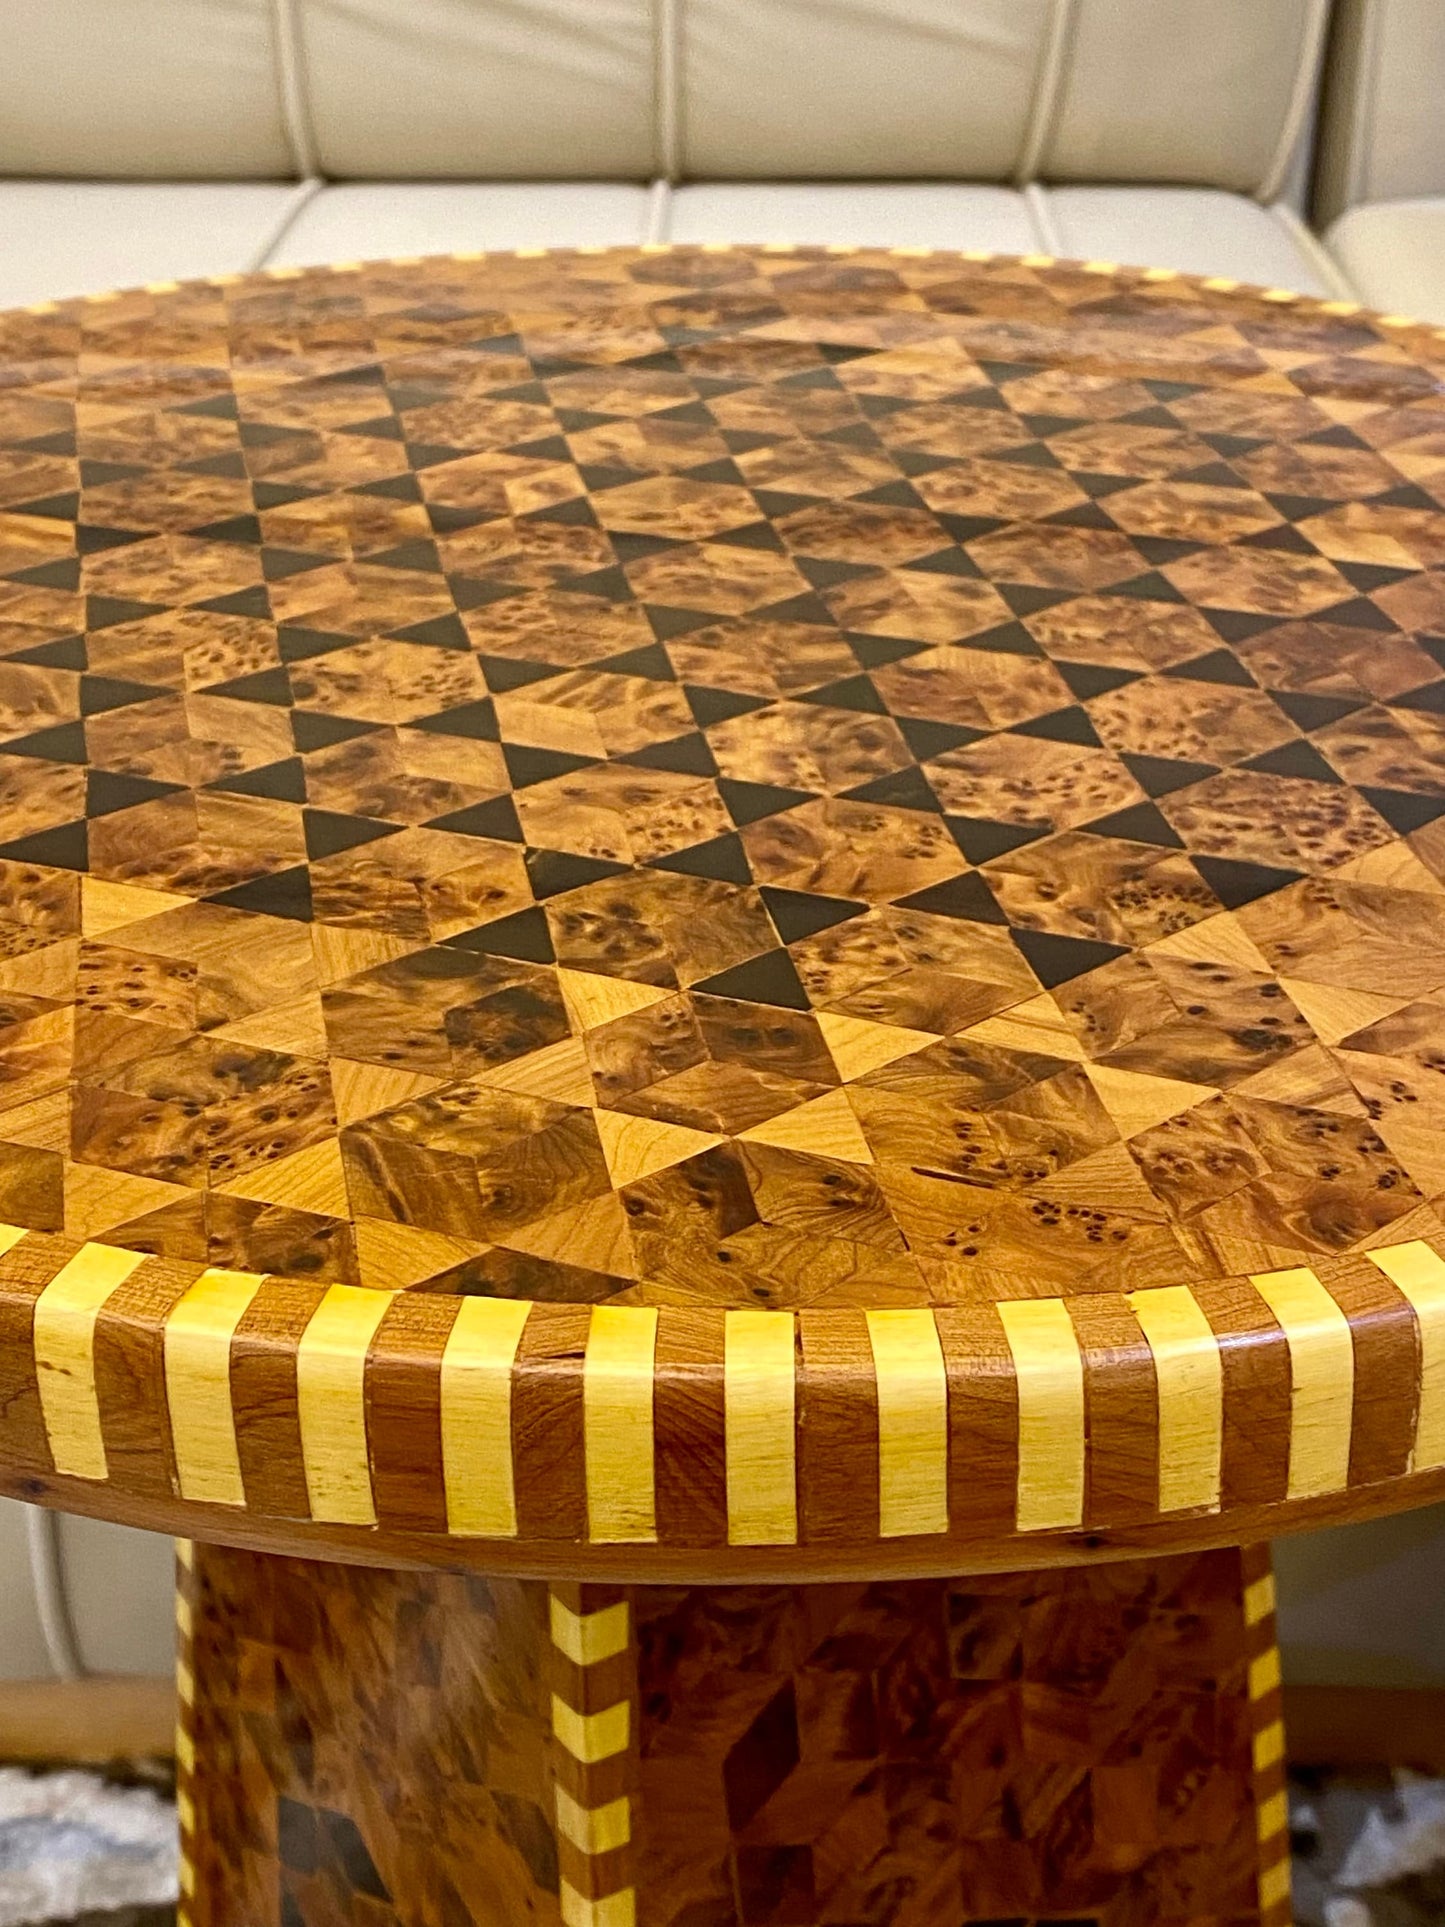 18" Luxurious Handmade Moroccan Thuya Wood Table with Lemon,unique home decor living room,Berber Coffee table,interior design furniture